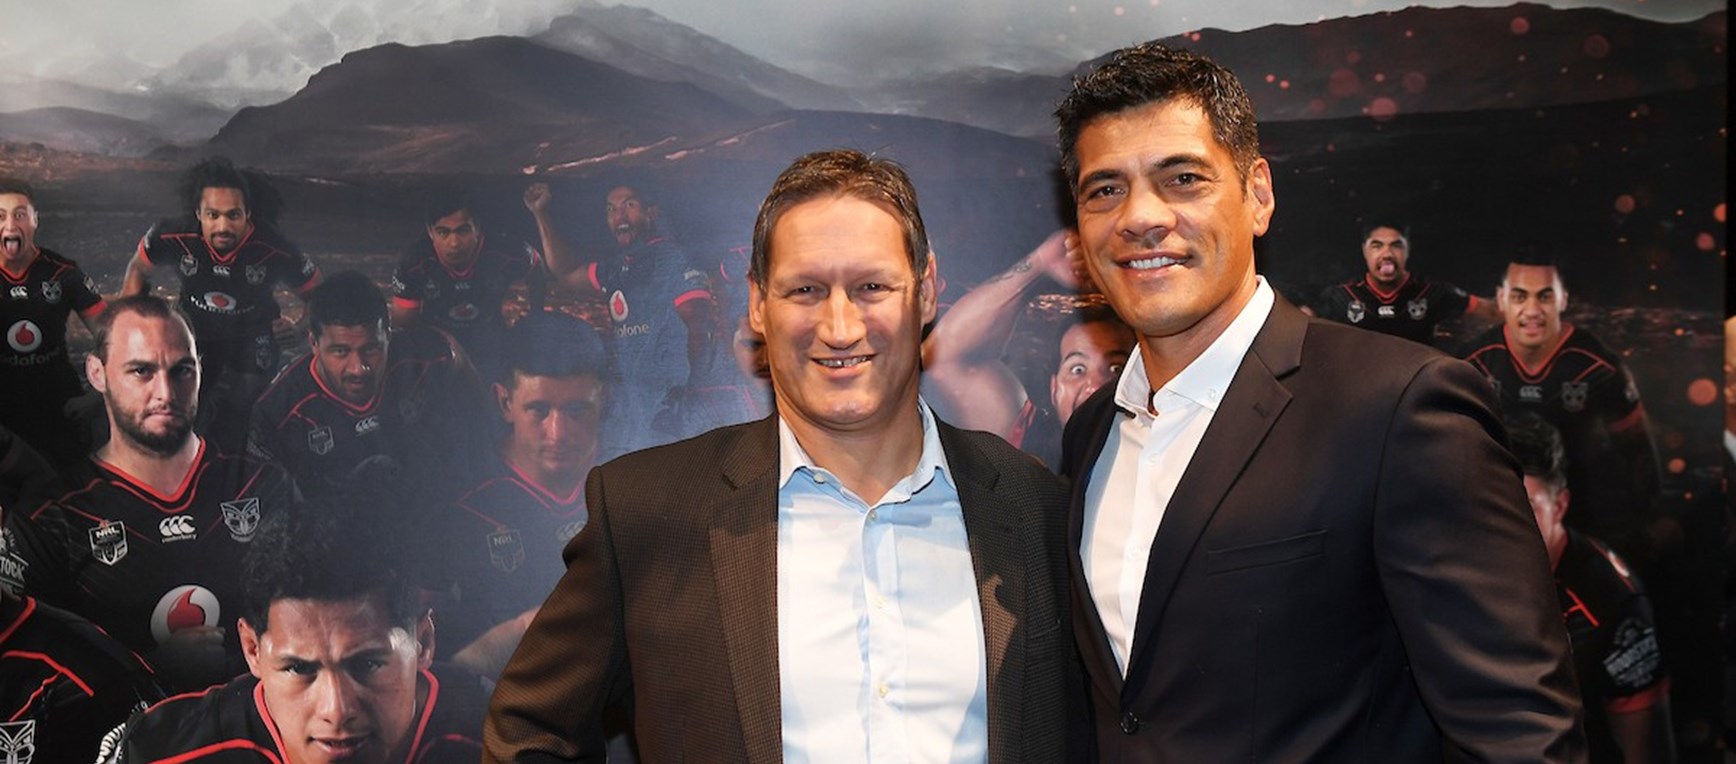 Season launch at SKYCITY in pictures